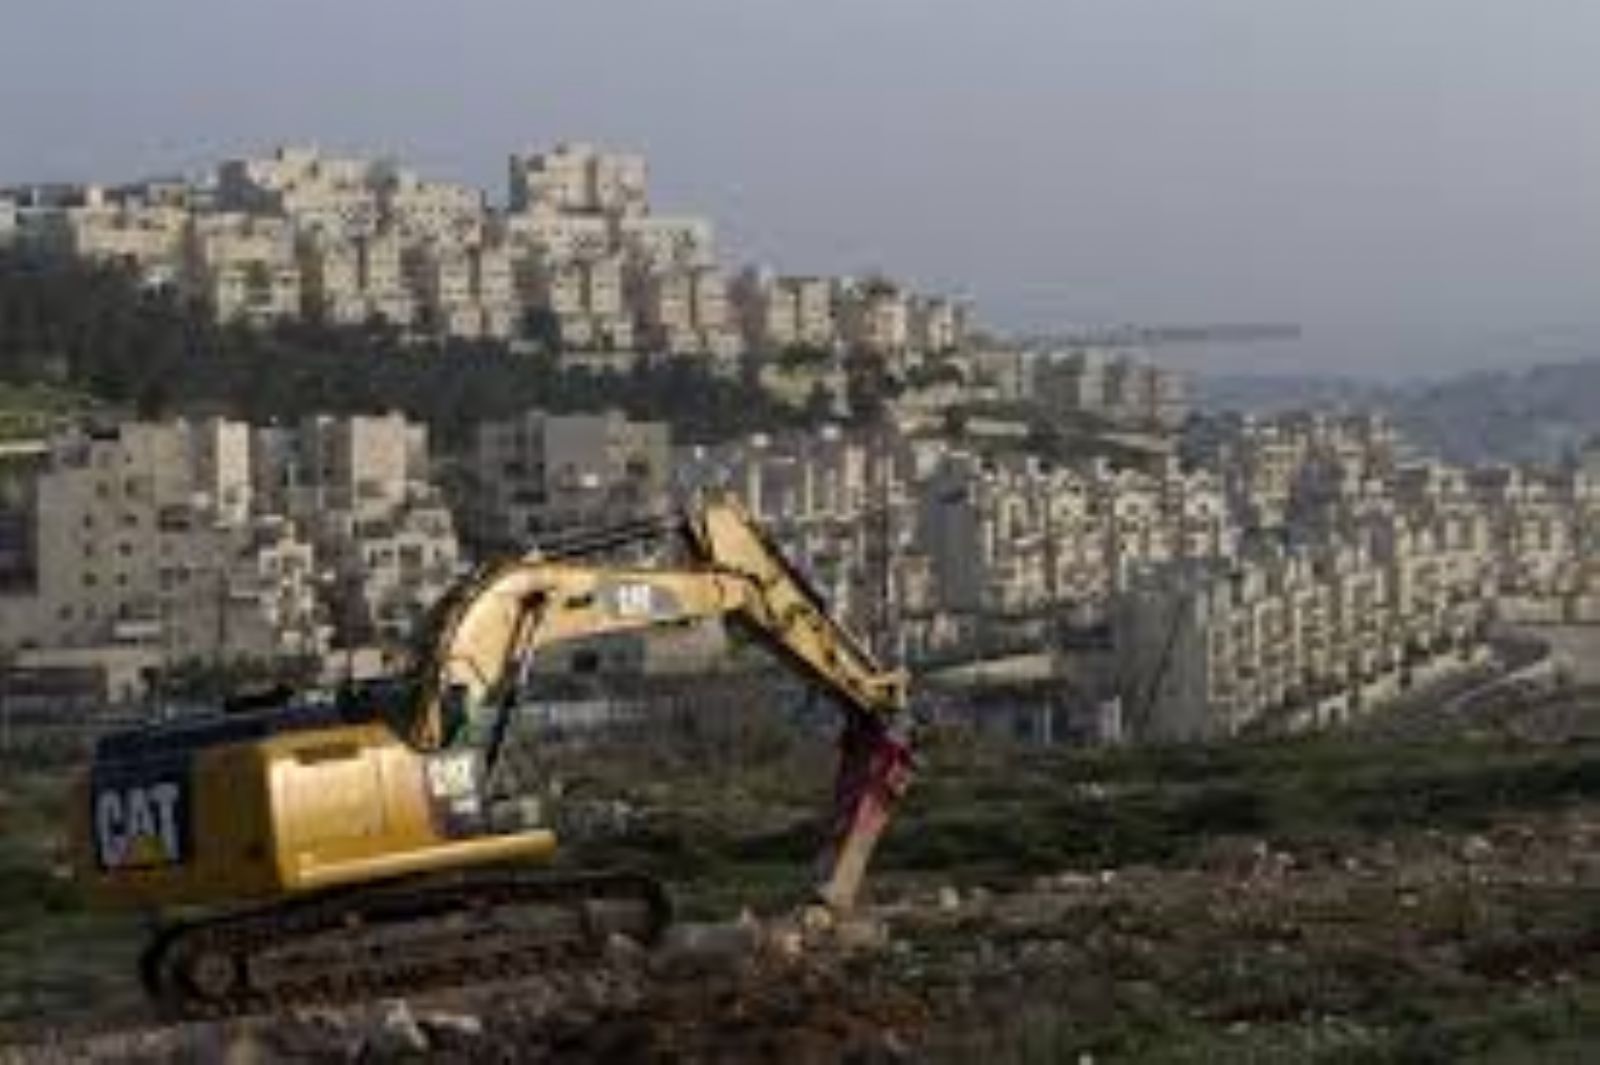 Three Displacement and Ethnic Cleansing settlement Schemes on the Occupation Government's Agenda